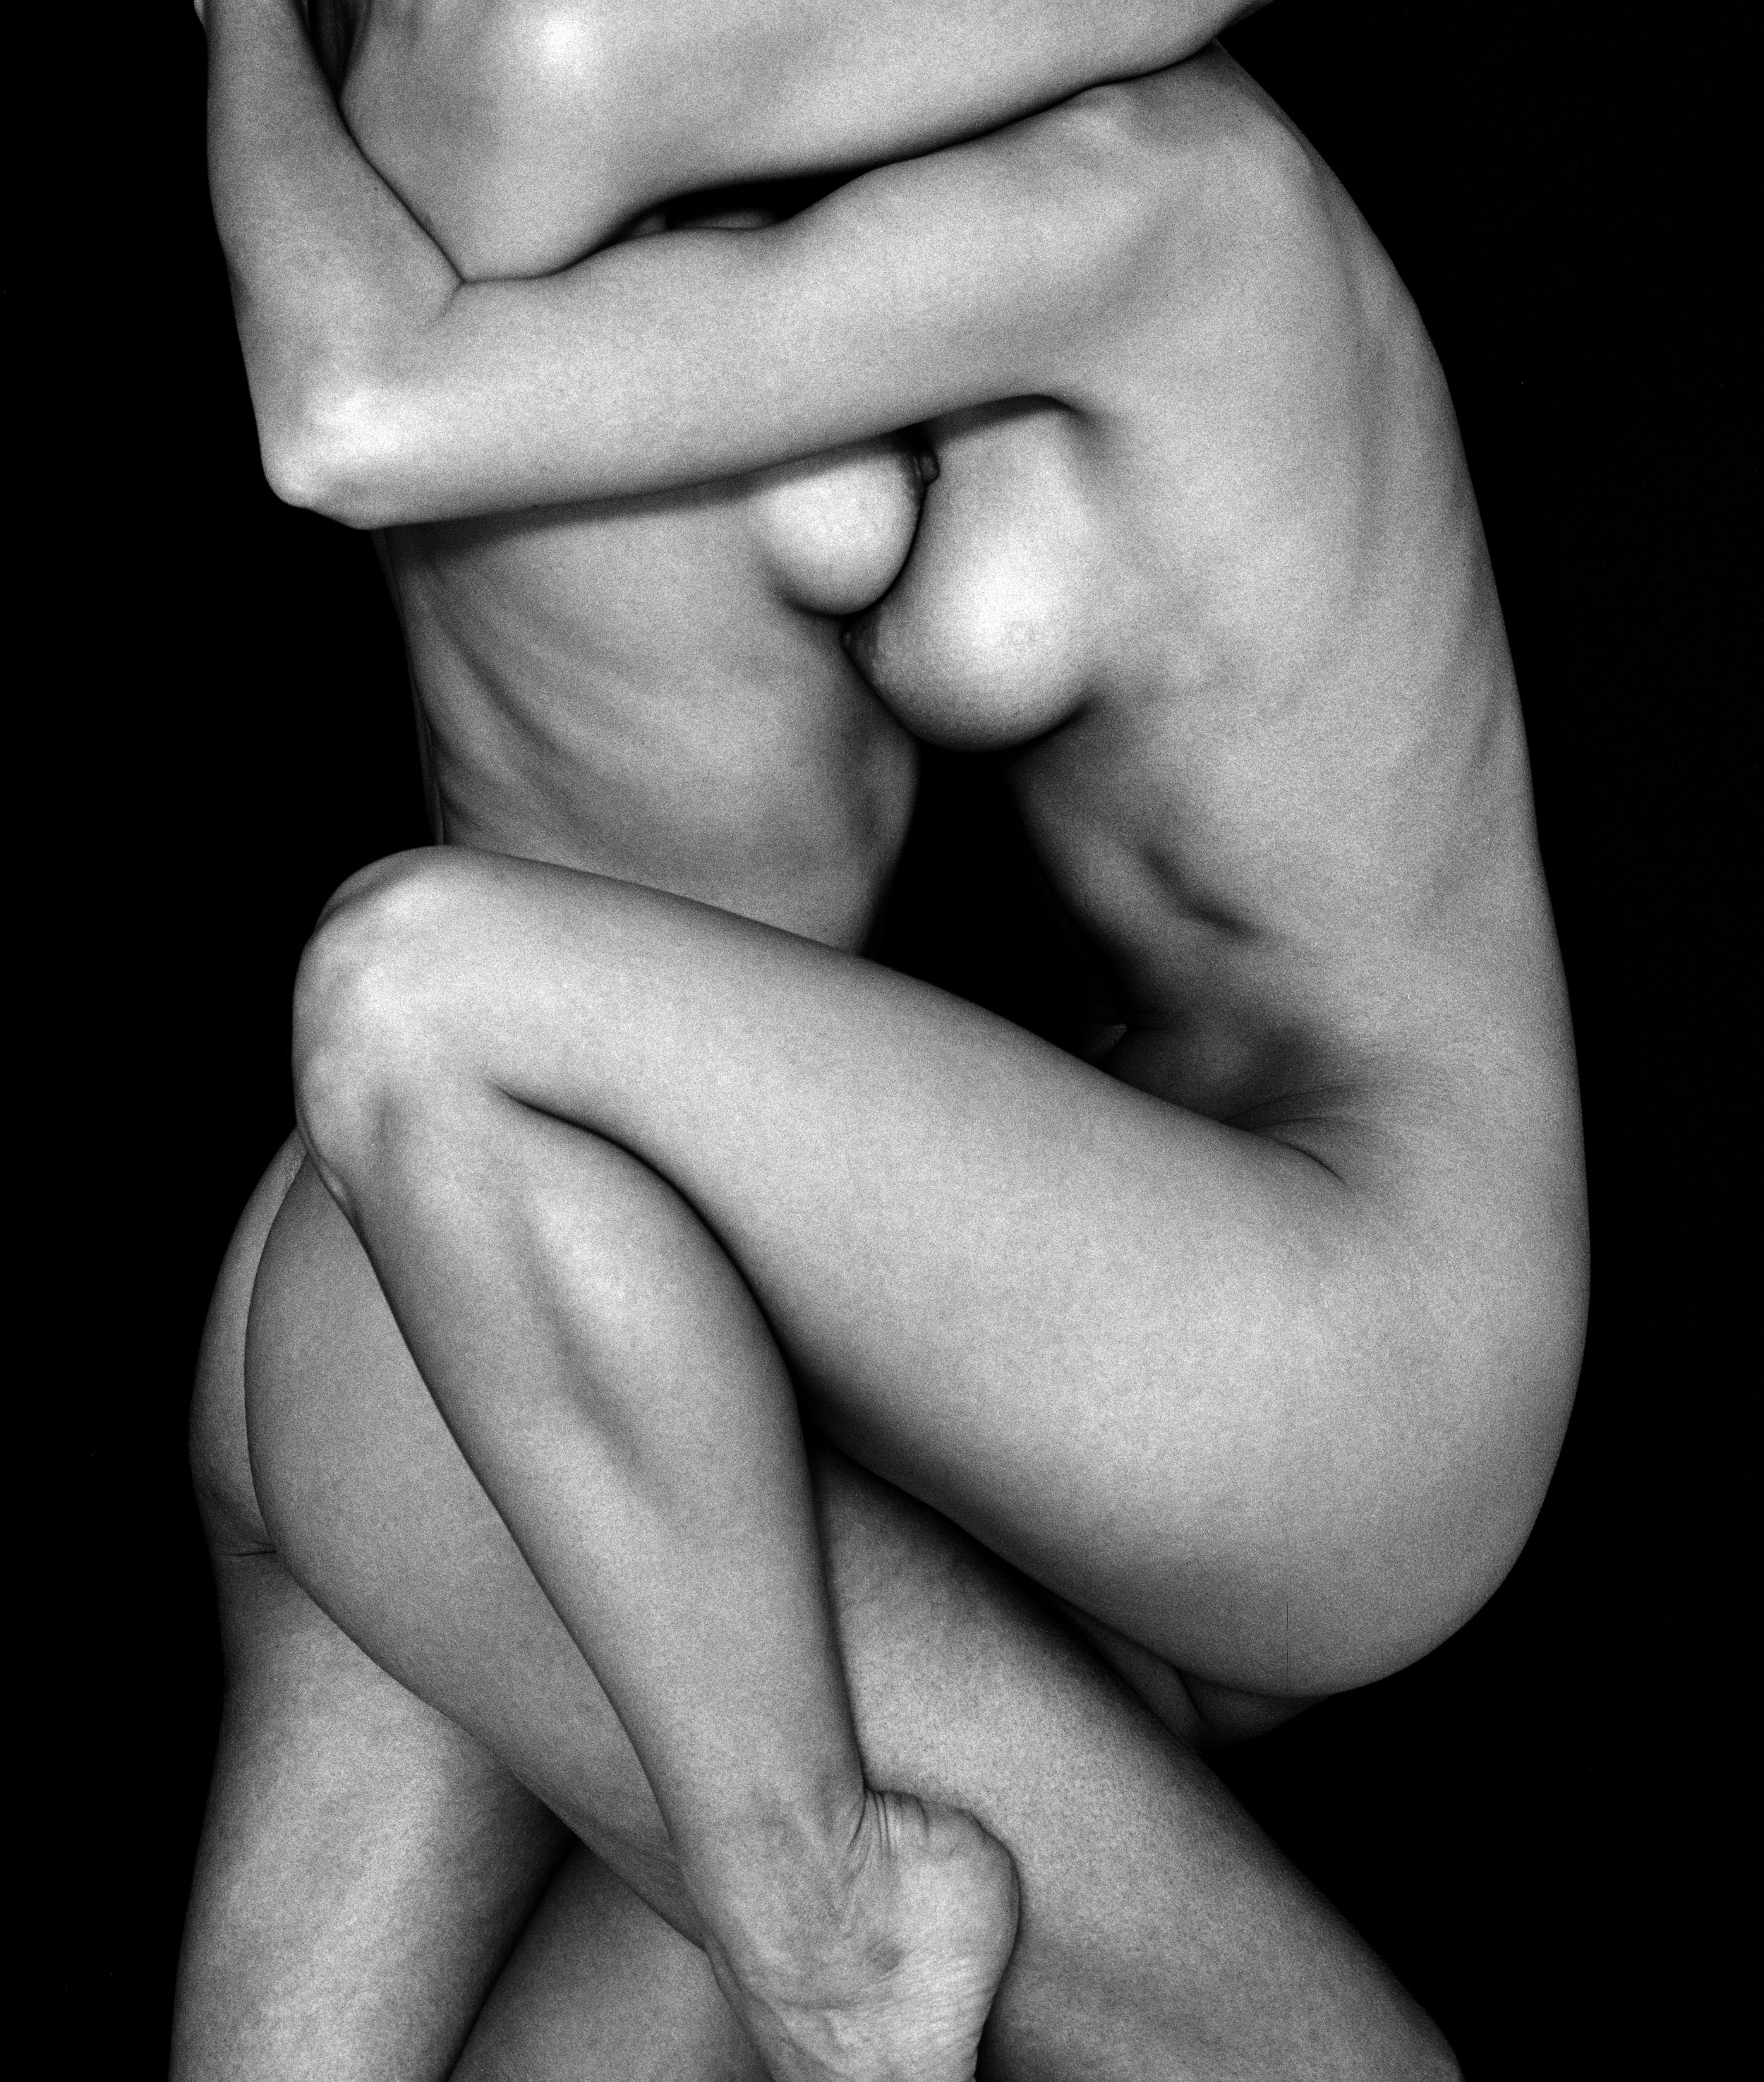  Couple entwined 1991